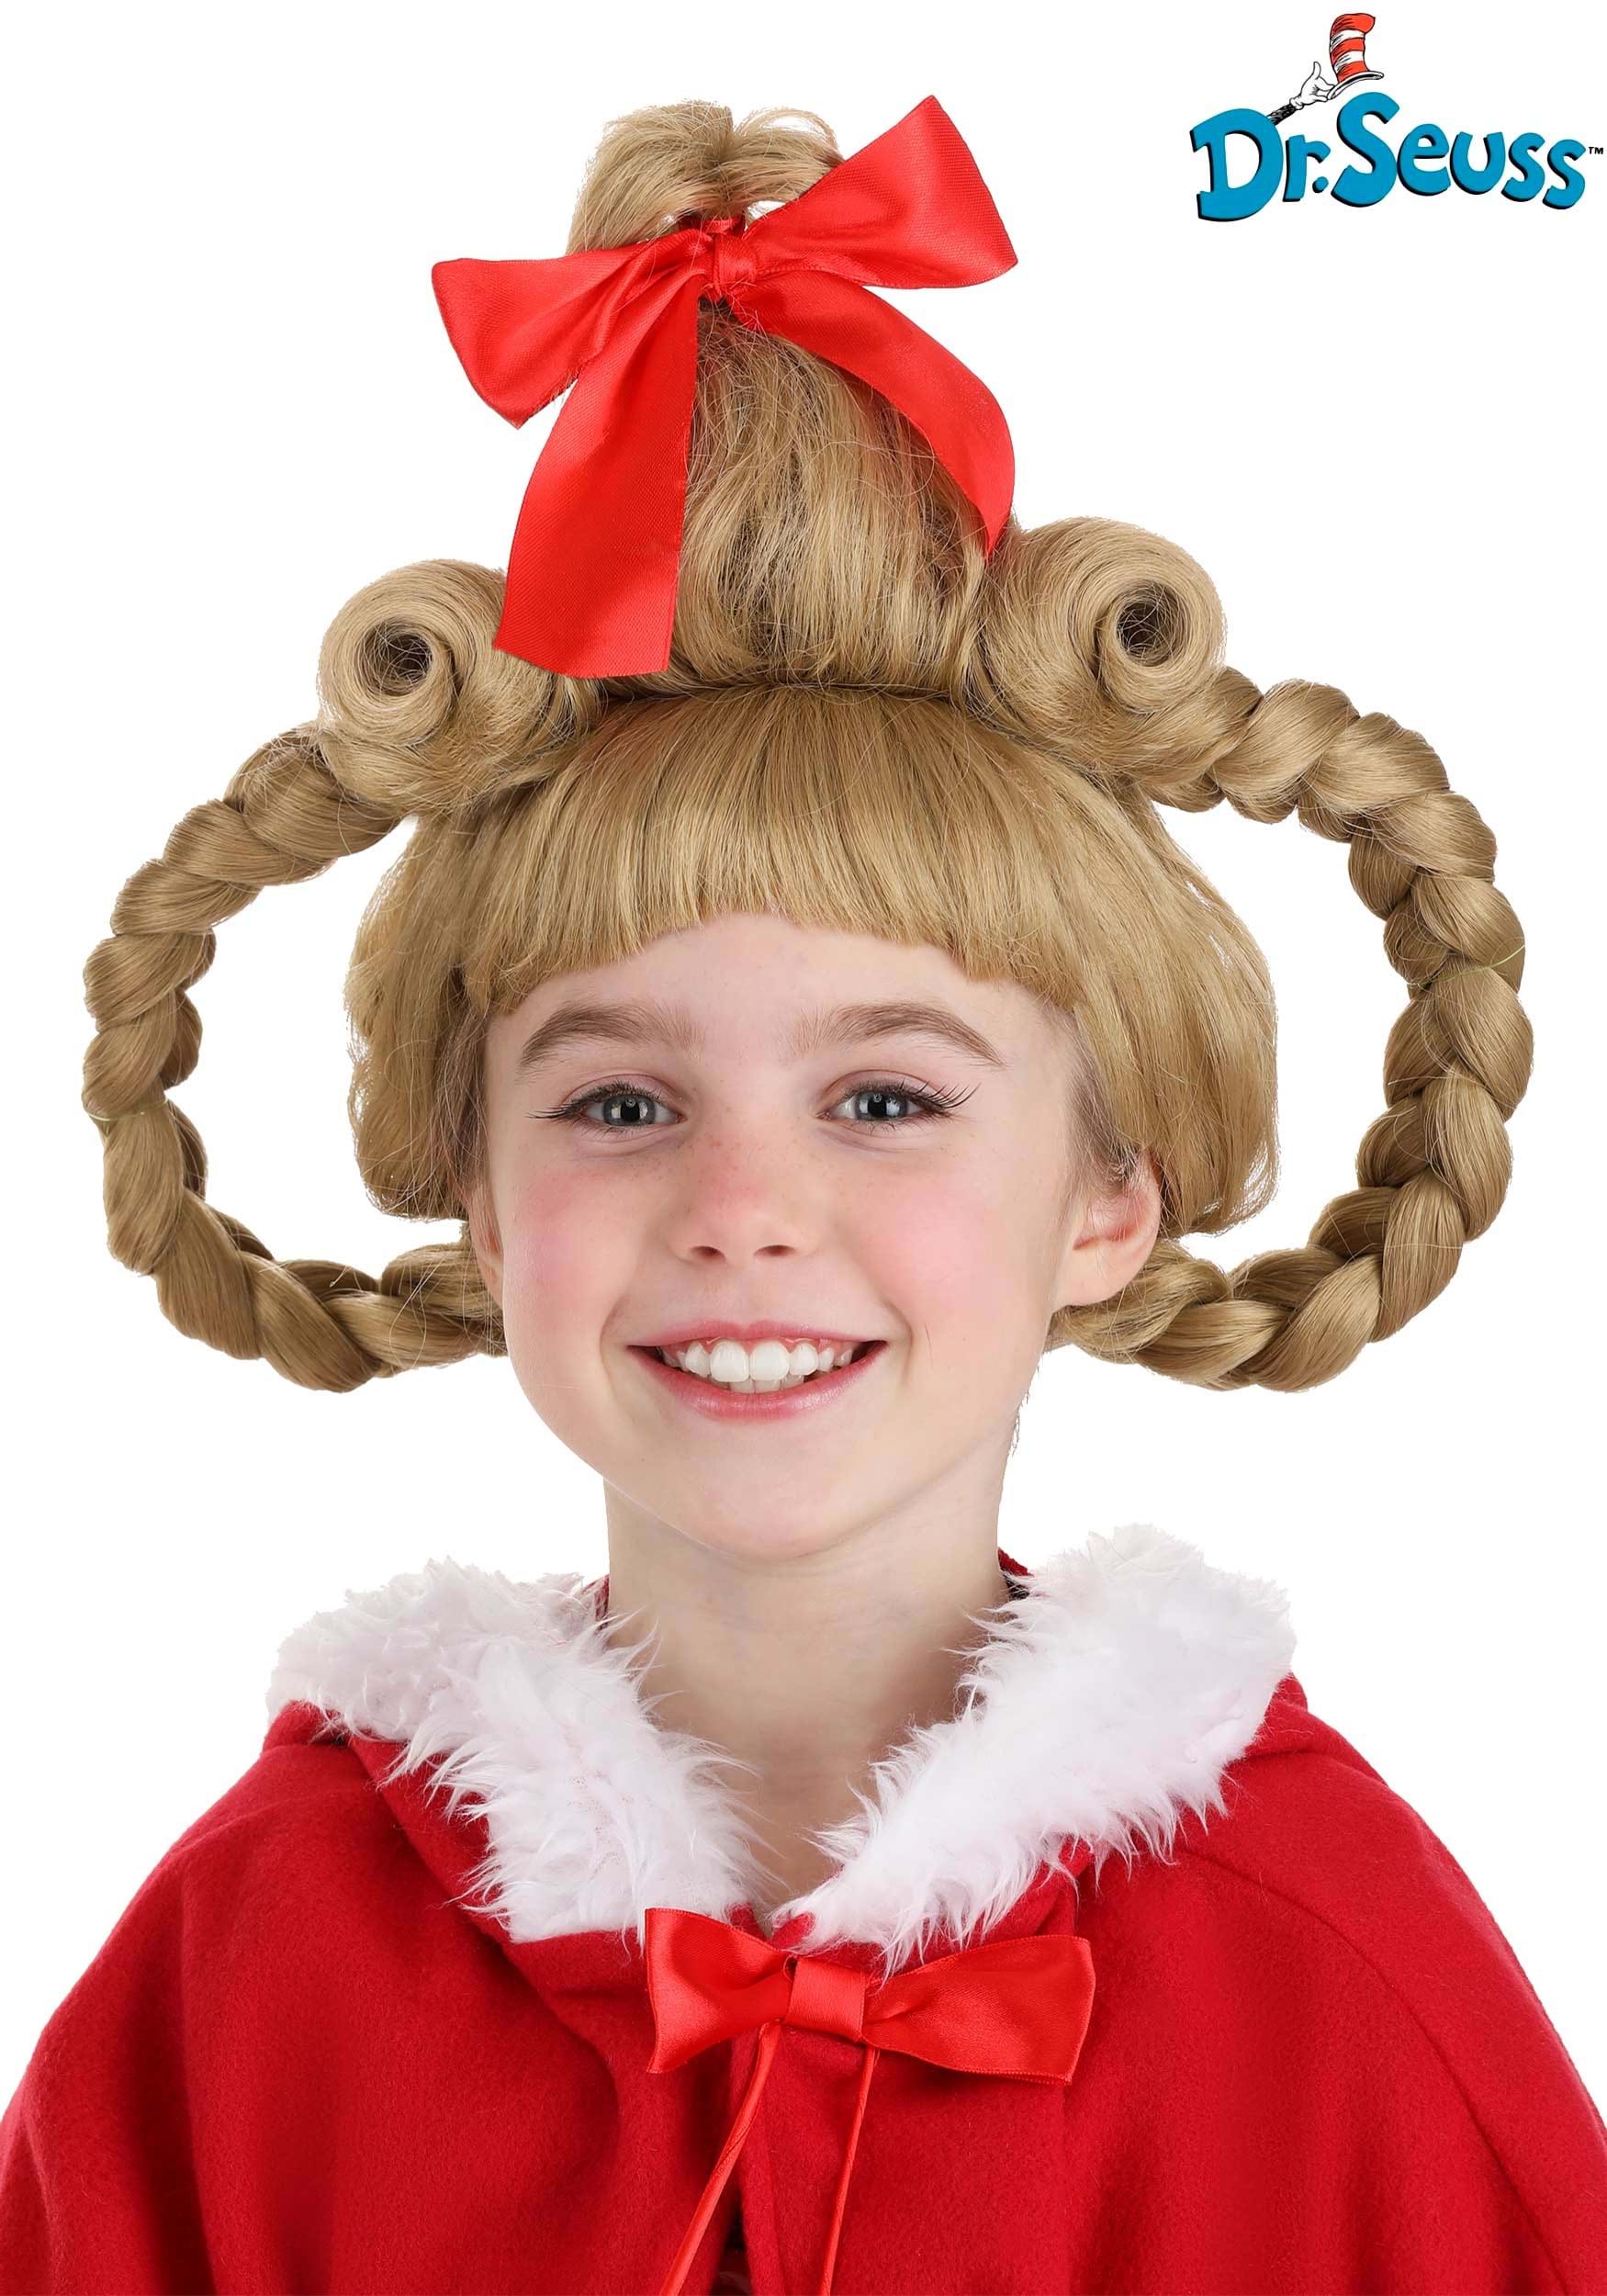 https://images.halloweencostumes.com/products/69566/1-1/kids-deluxe-christmas-girl-wig-.jpg